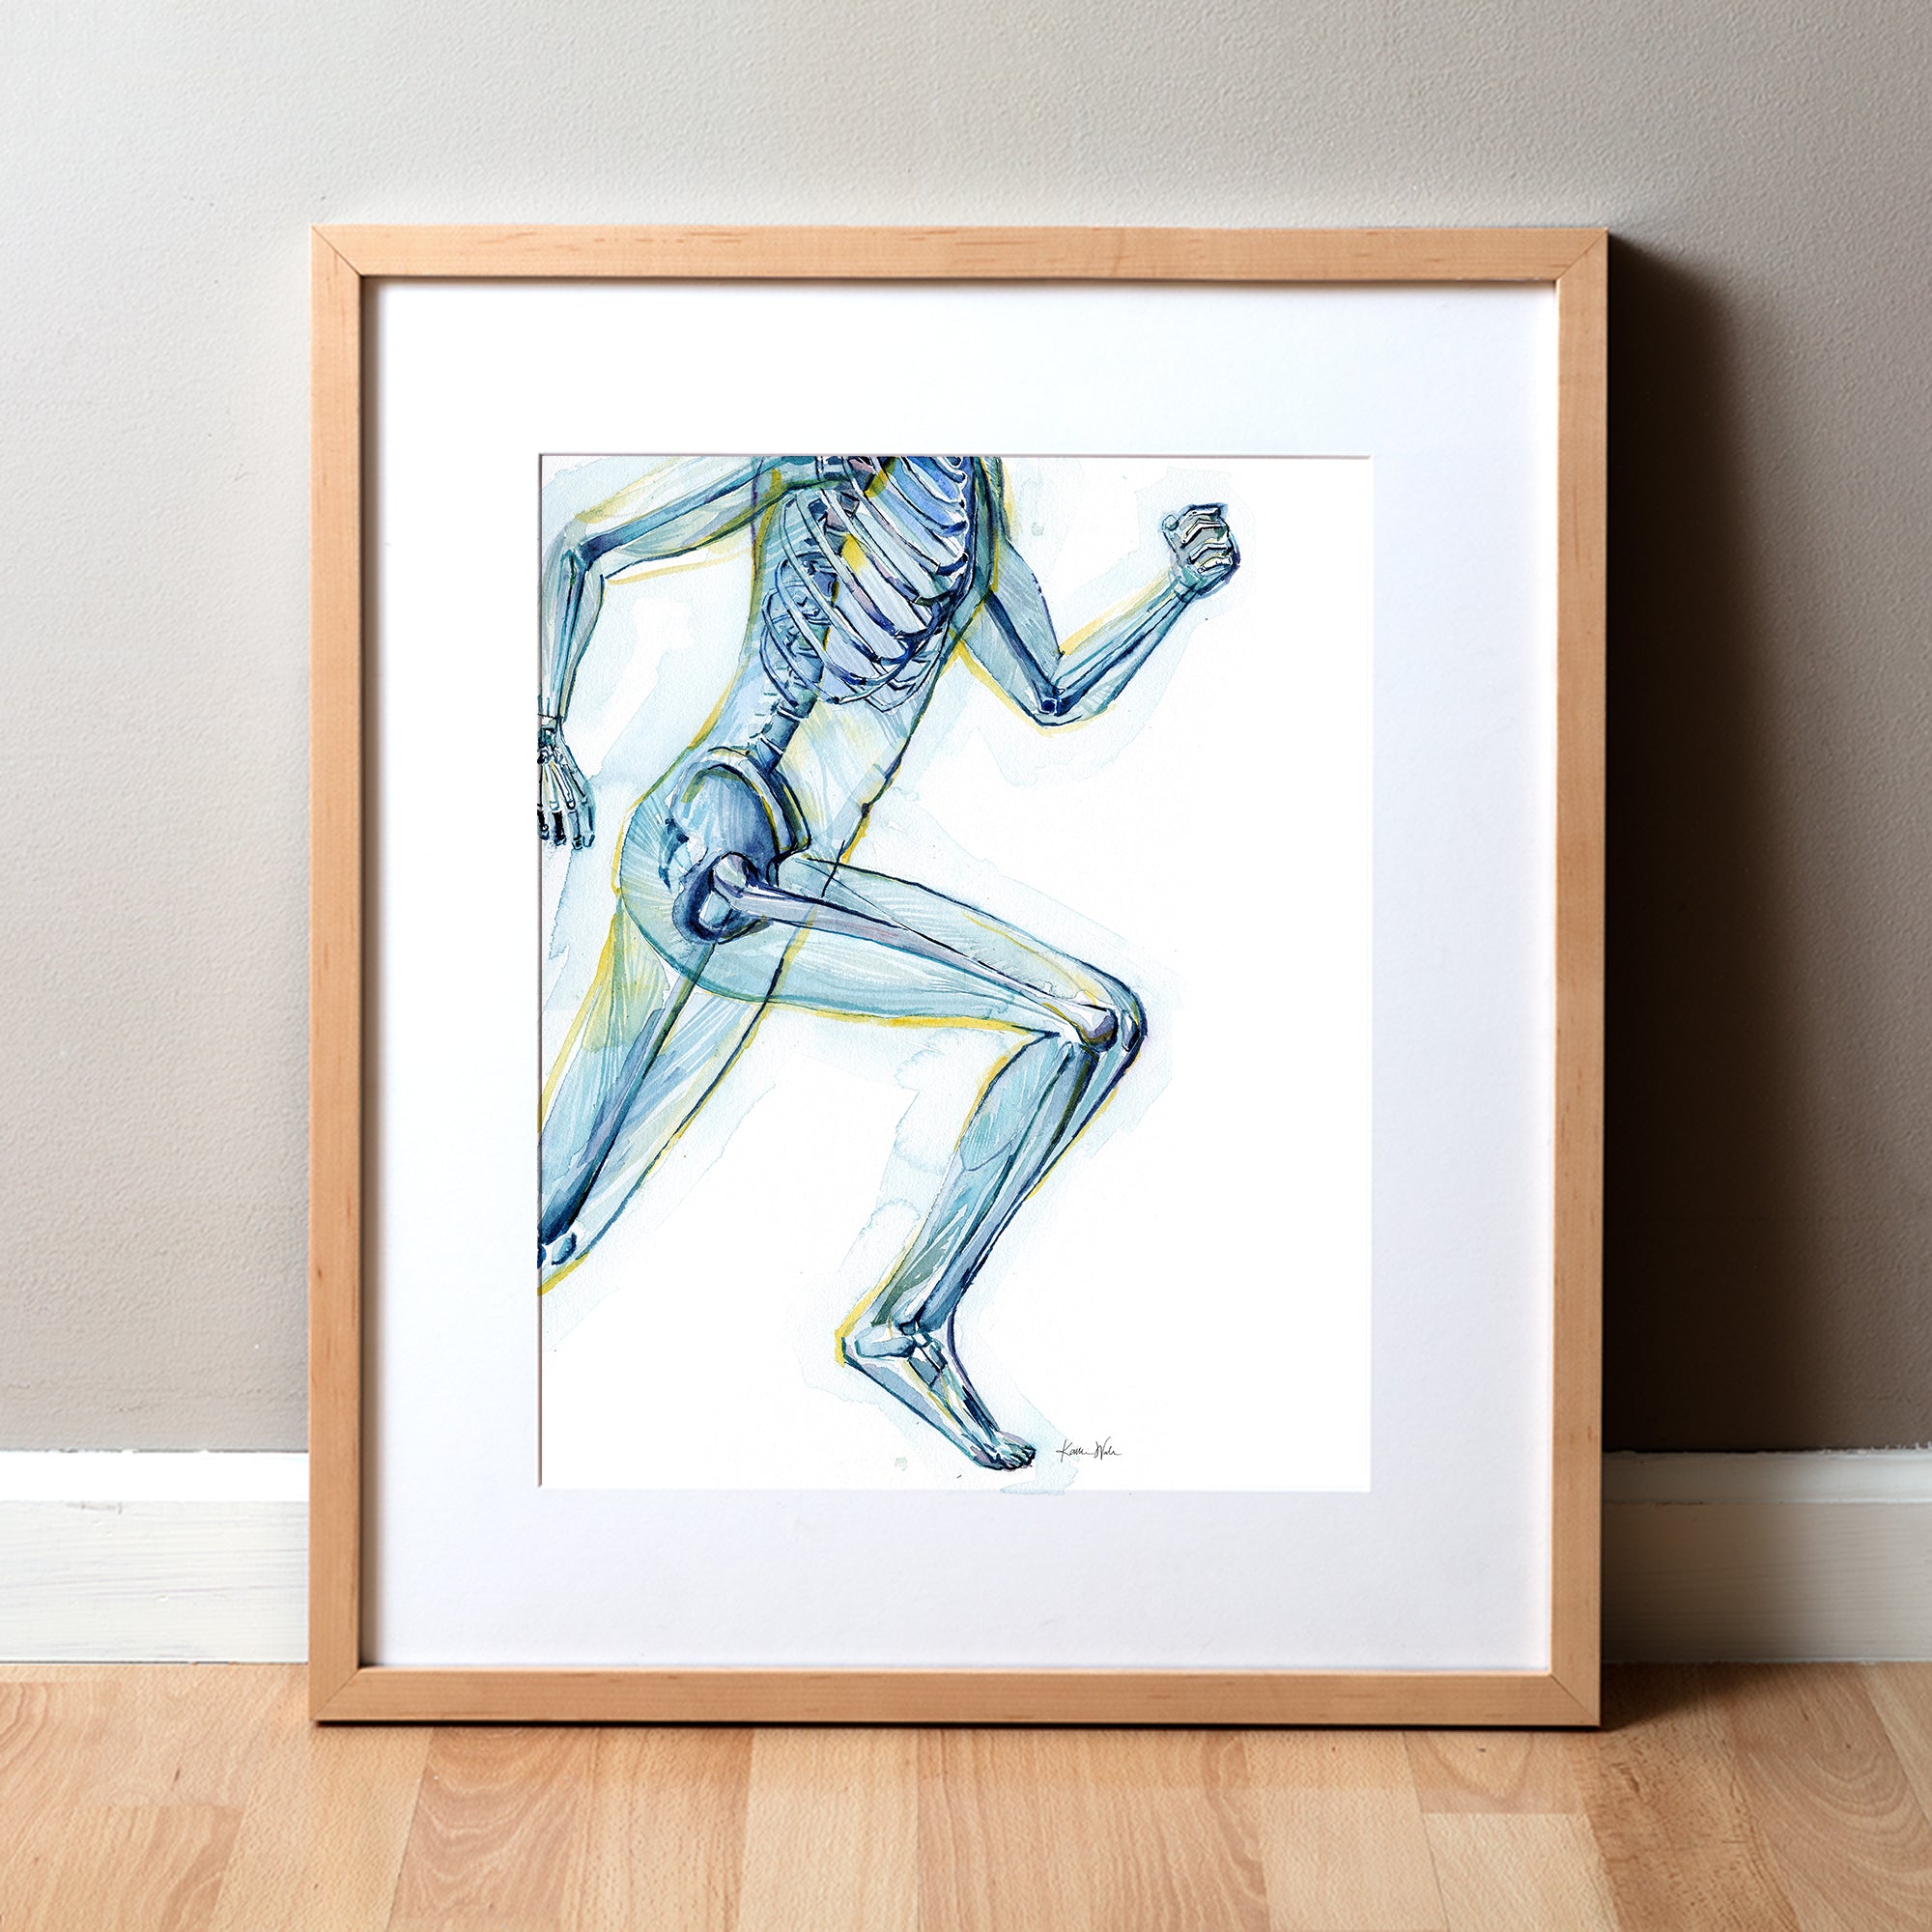 Framed watercolor painting of a runner, showing the skeletal structure beneath.